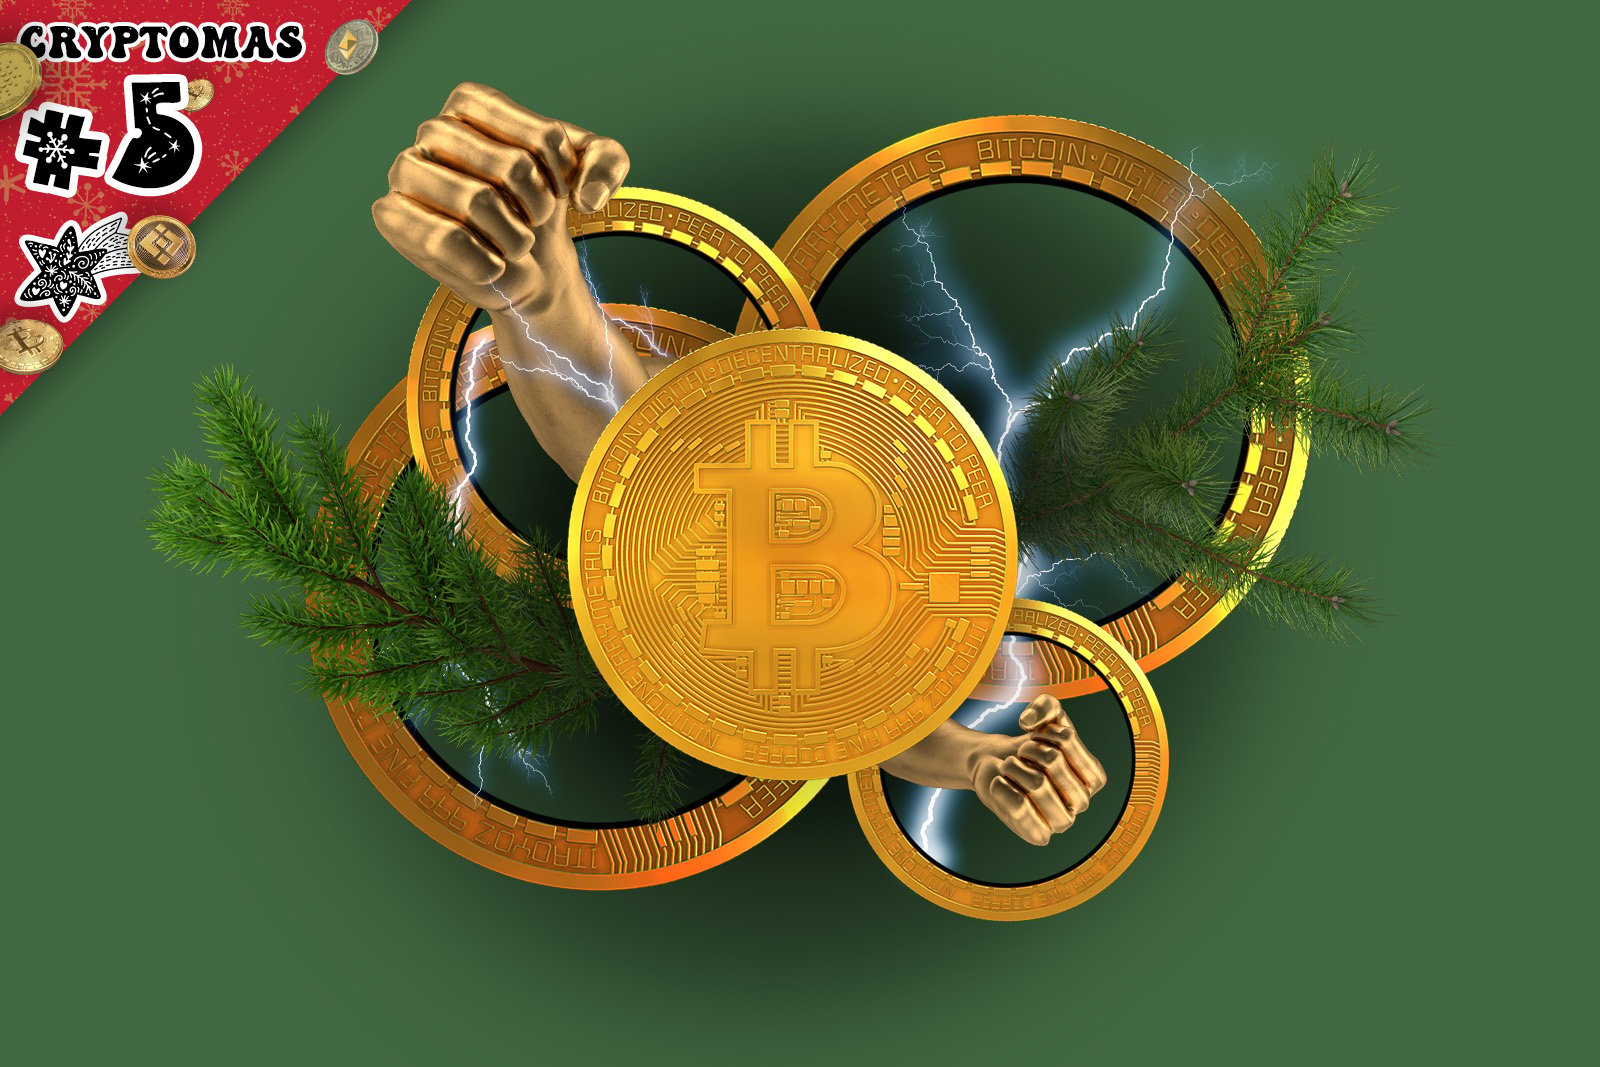 "Cryptomas #5" in the corner. The central mage depicts 5 interconnected gold rings with Bitcoin at the center, decorated with lightning and fir trees.